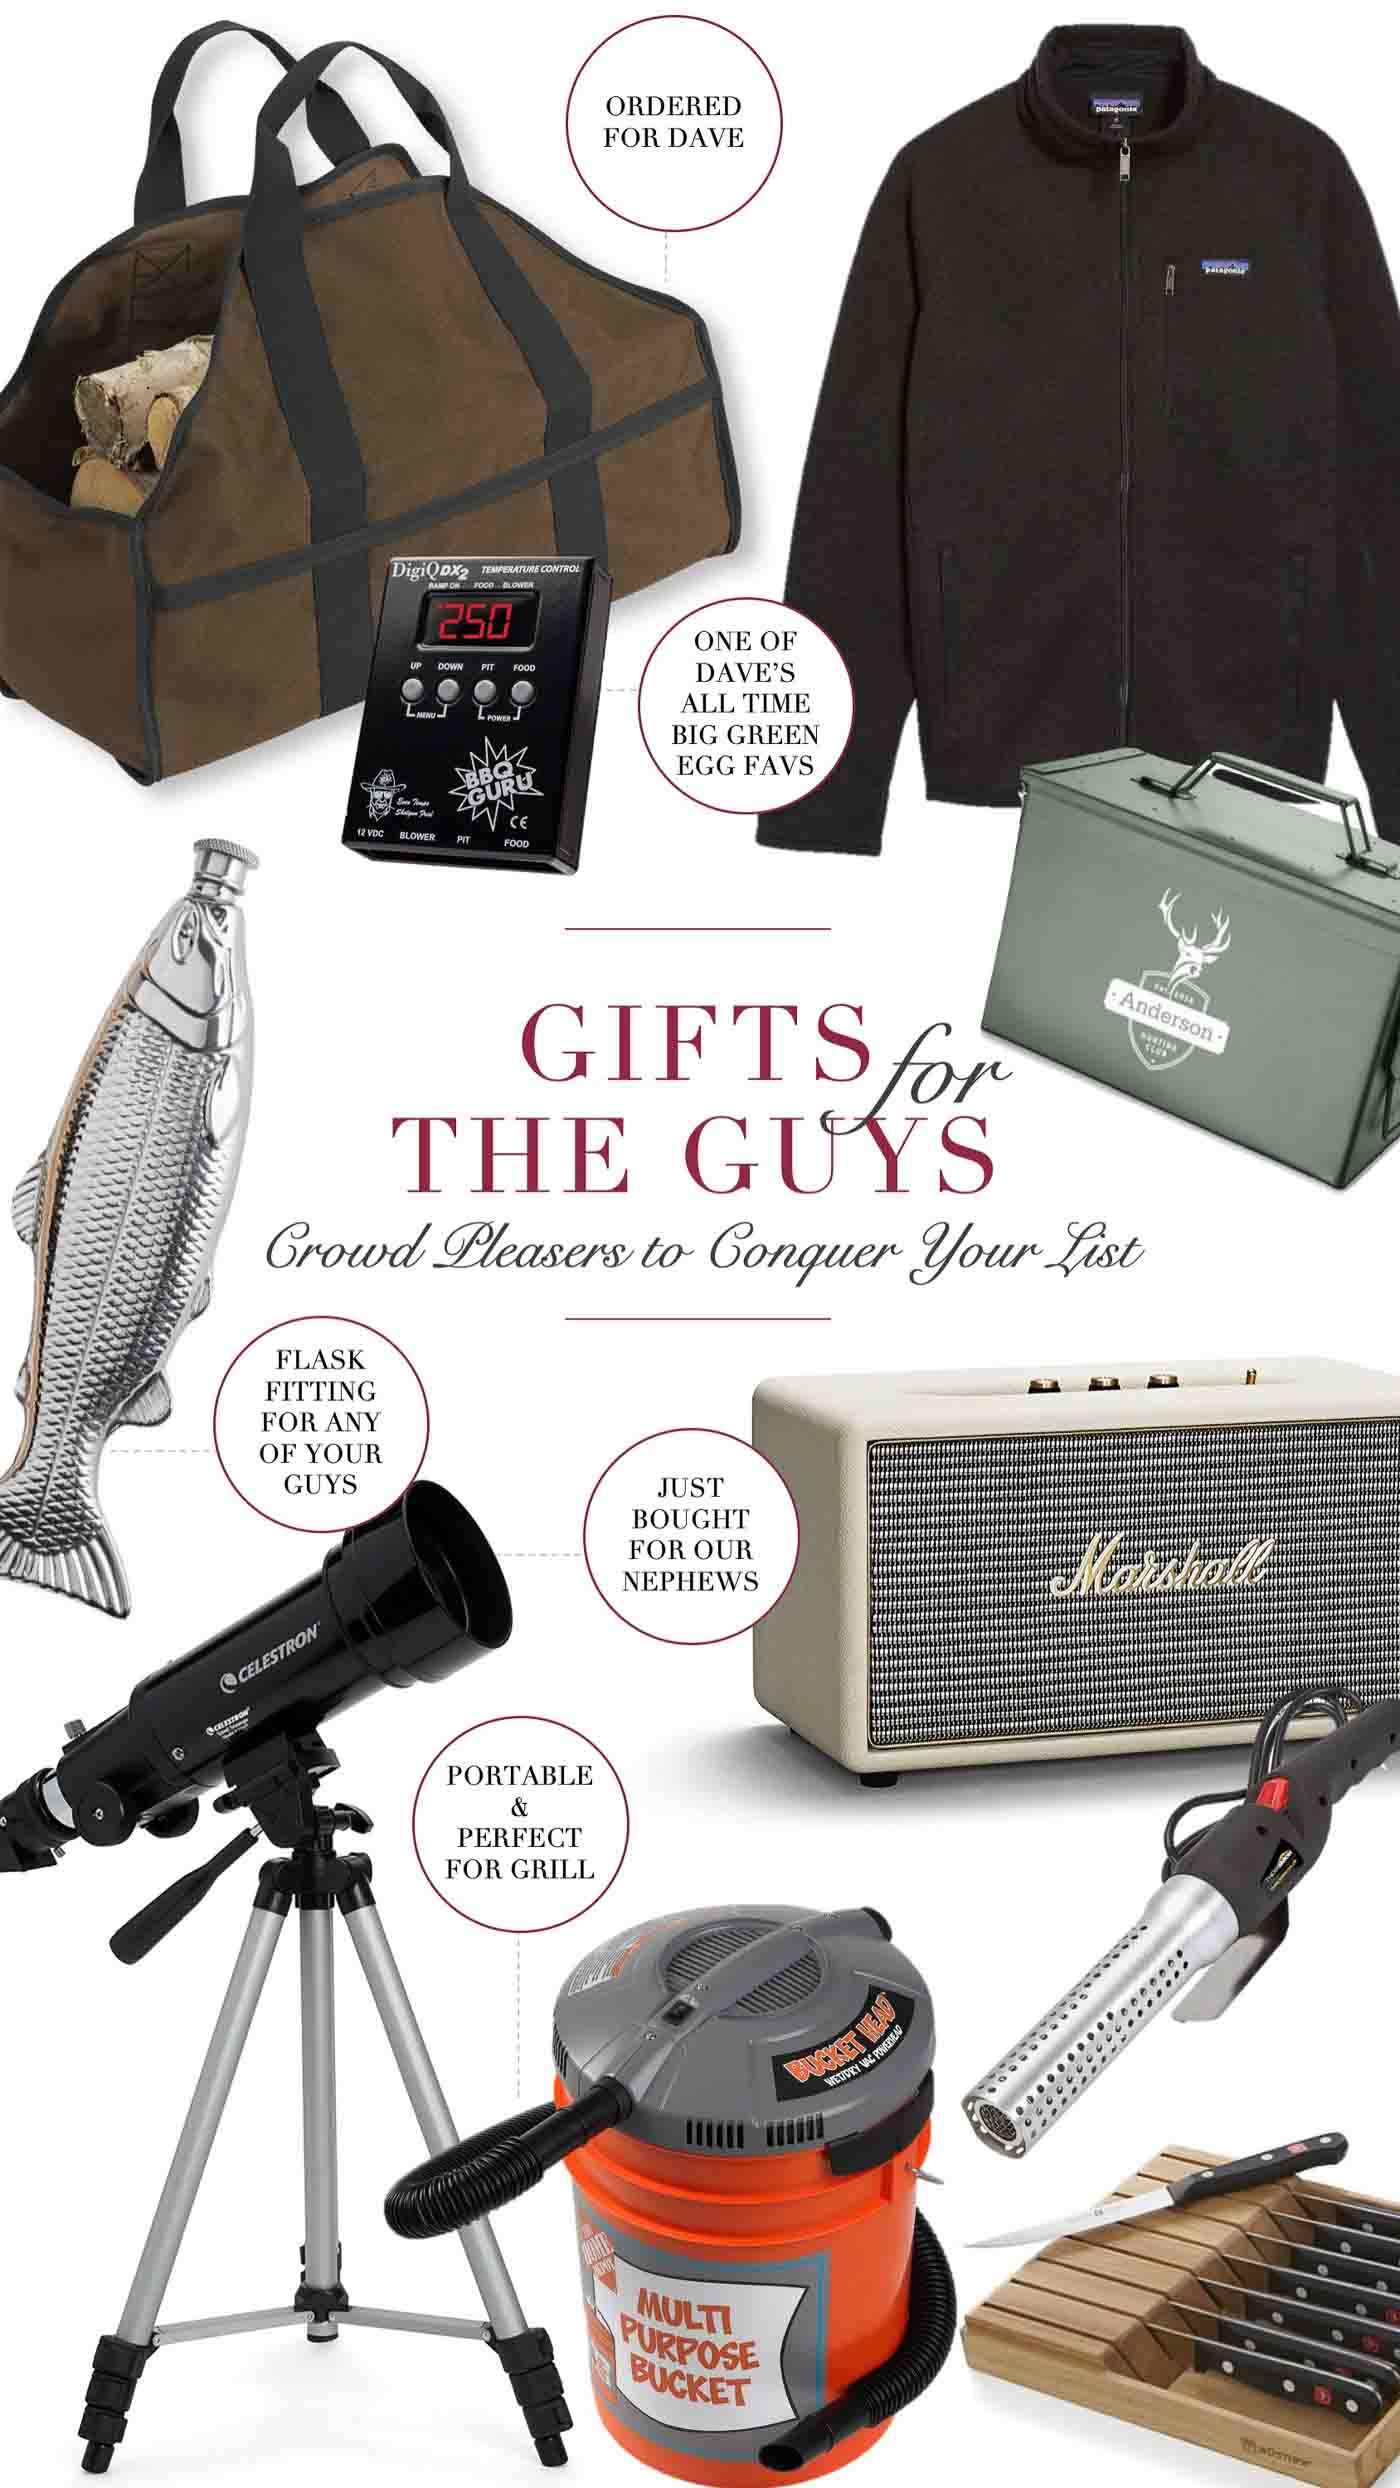 Holiday Gift Ideas Husband
 Holiday Gift Ideas for Guys Dads & Brothers Husbands